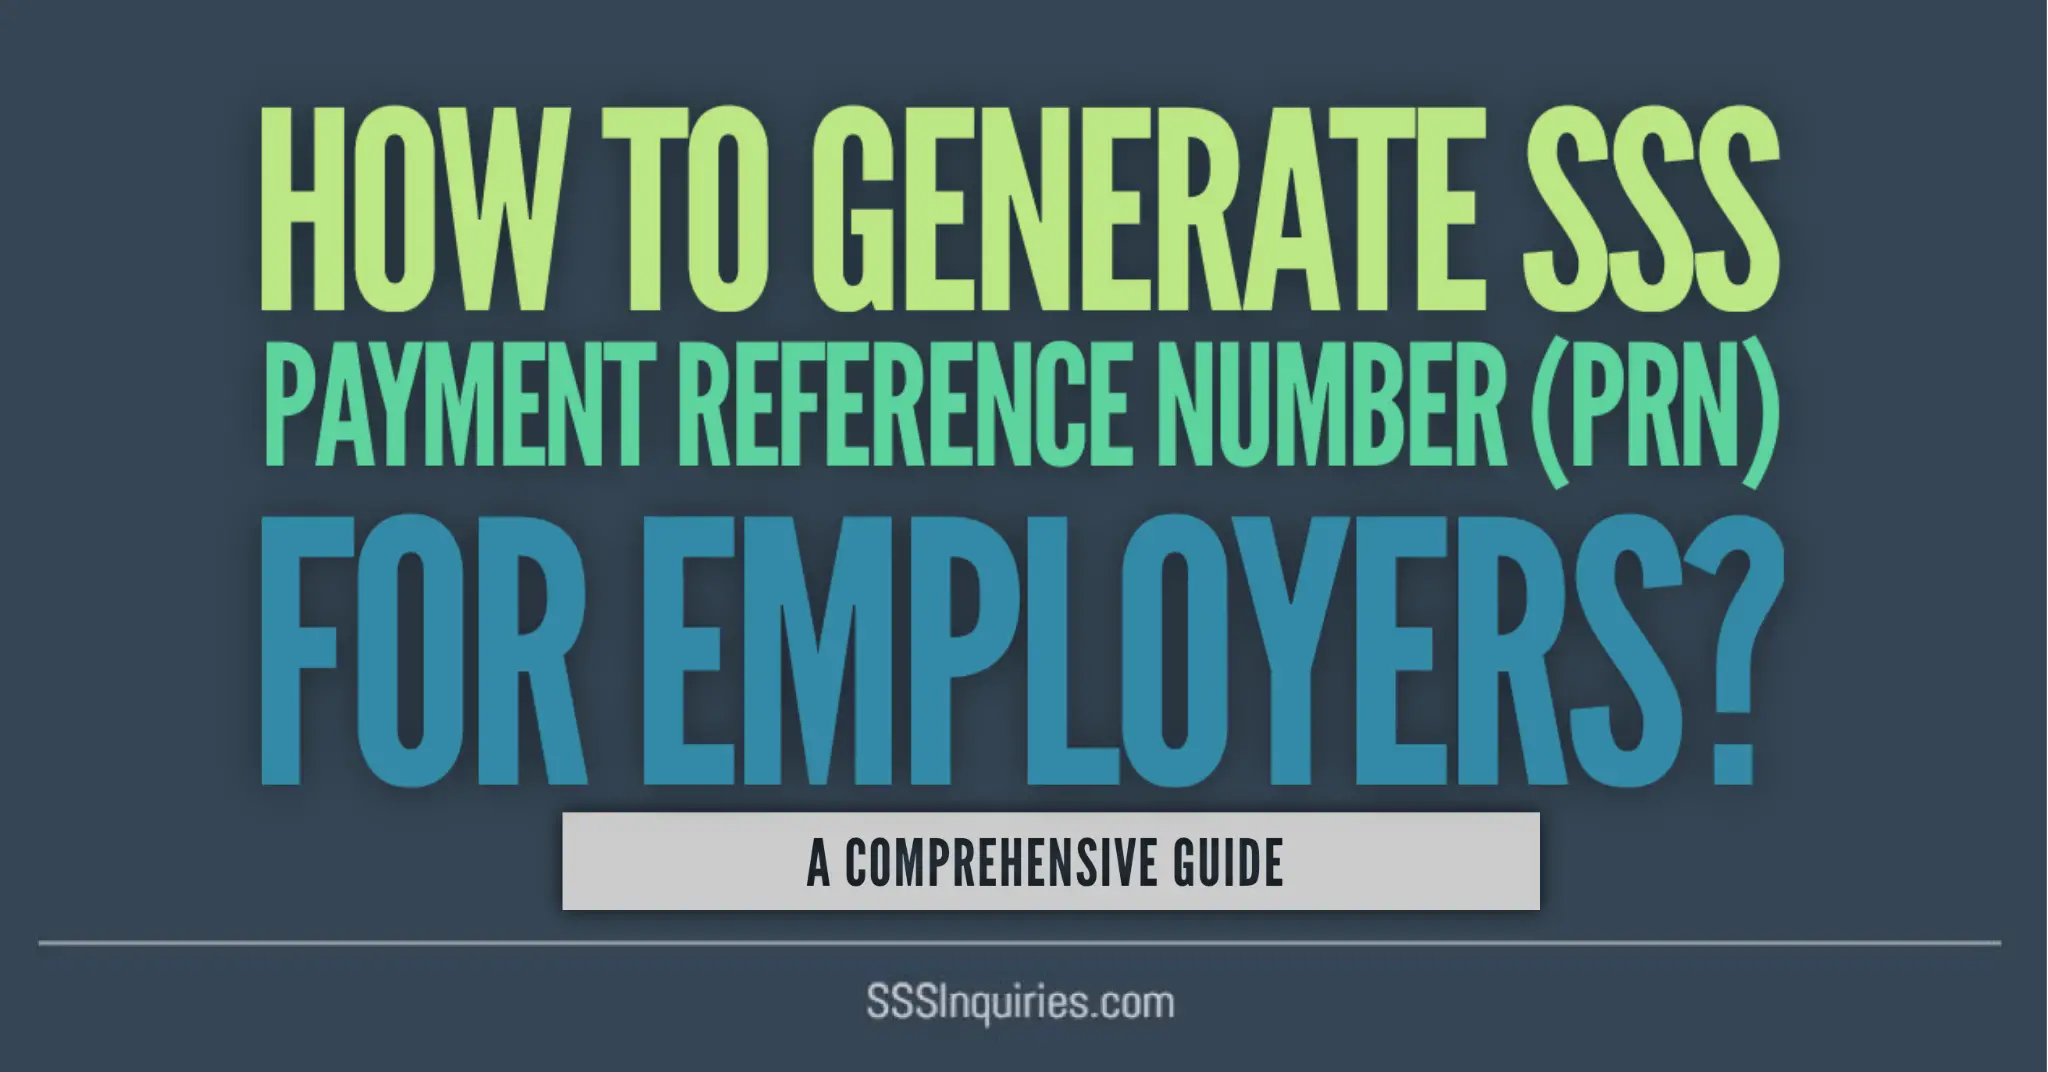 How to Generate SSS Payment Reference Number (PRN) for Employers?